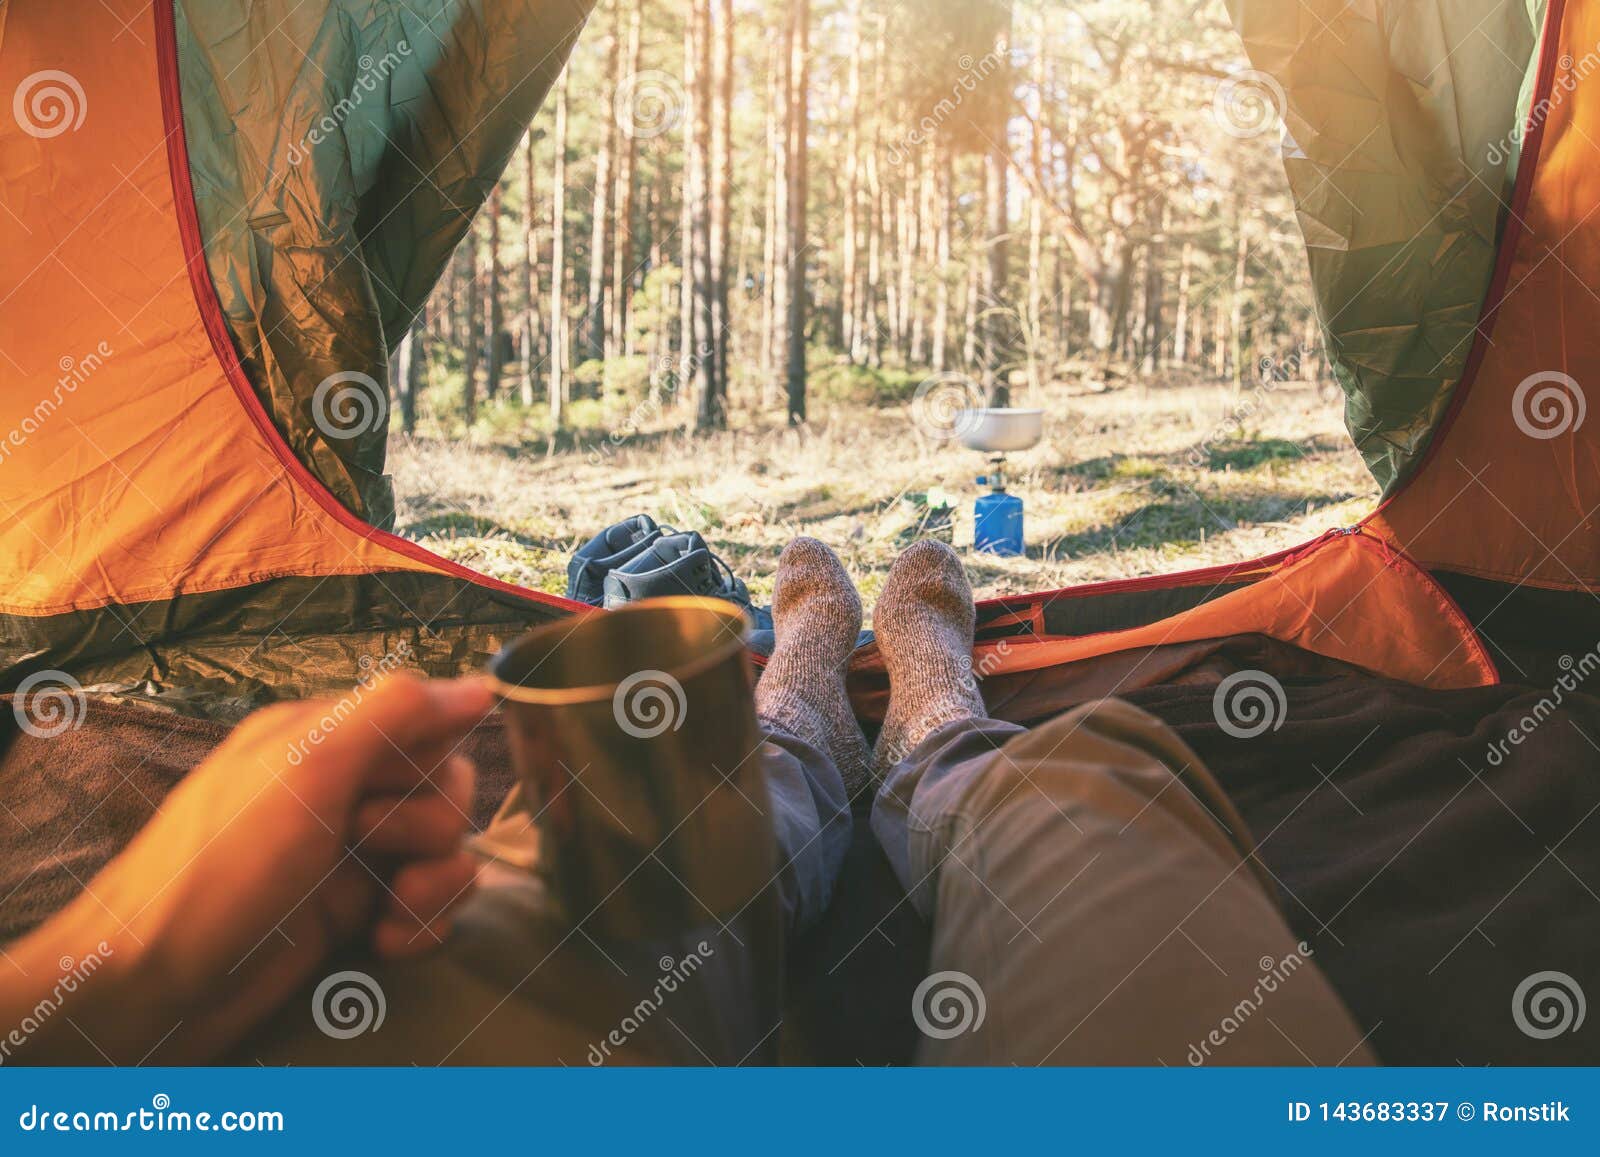 outdoor adventure tourism - man laying in tent with cup of tea